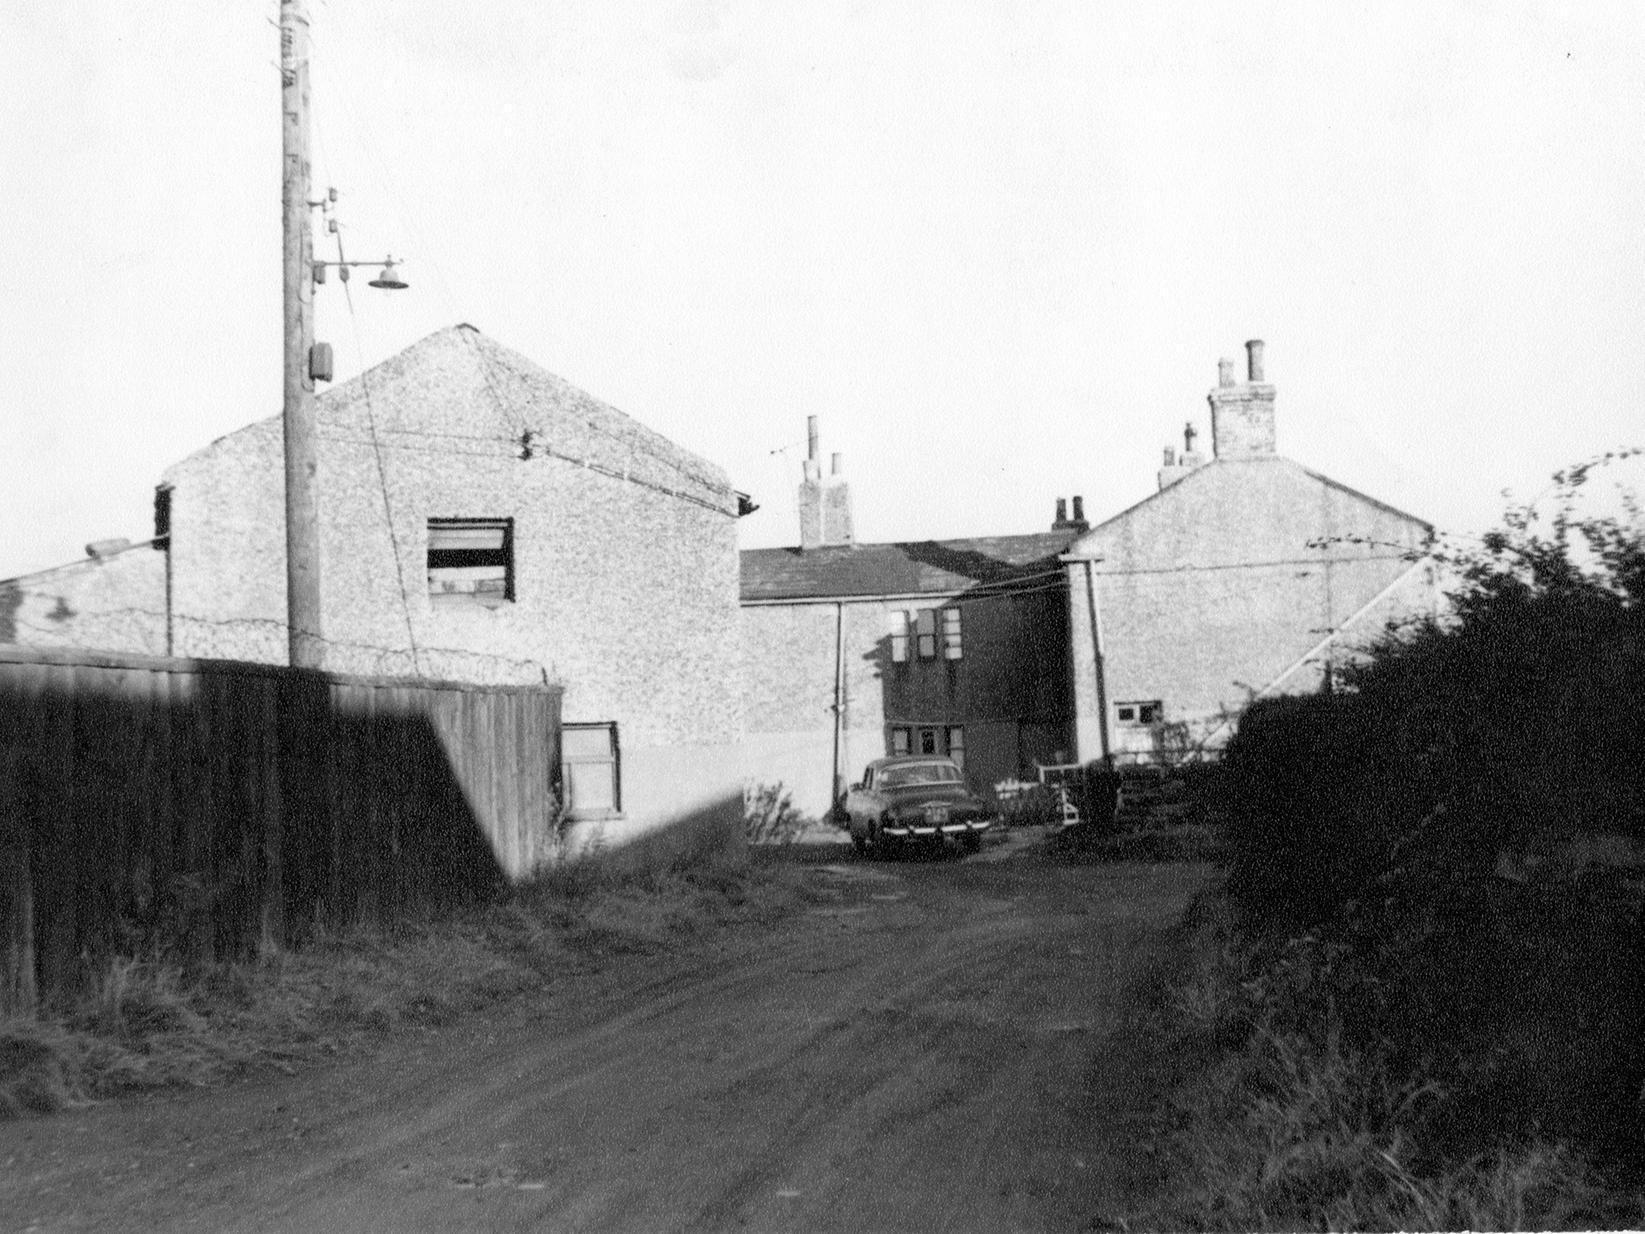 A view of unmade access road to Royal Oak Cottages. This road came from Gildersome Lane, past Moorhead woollen mill to Royal Oak. A car can be seen parked outside one of the houses.